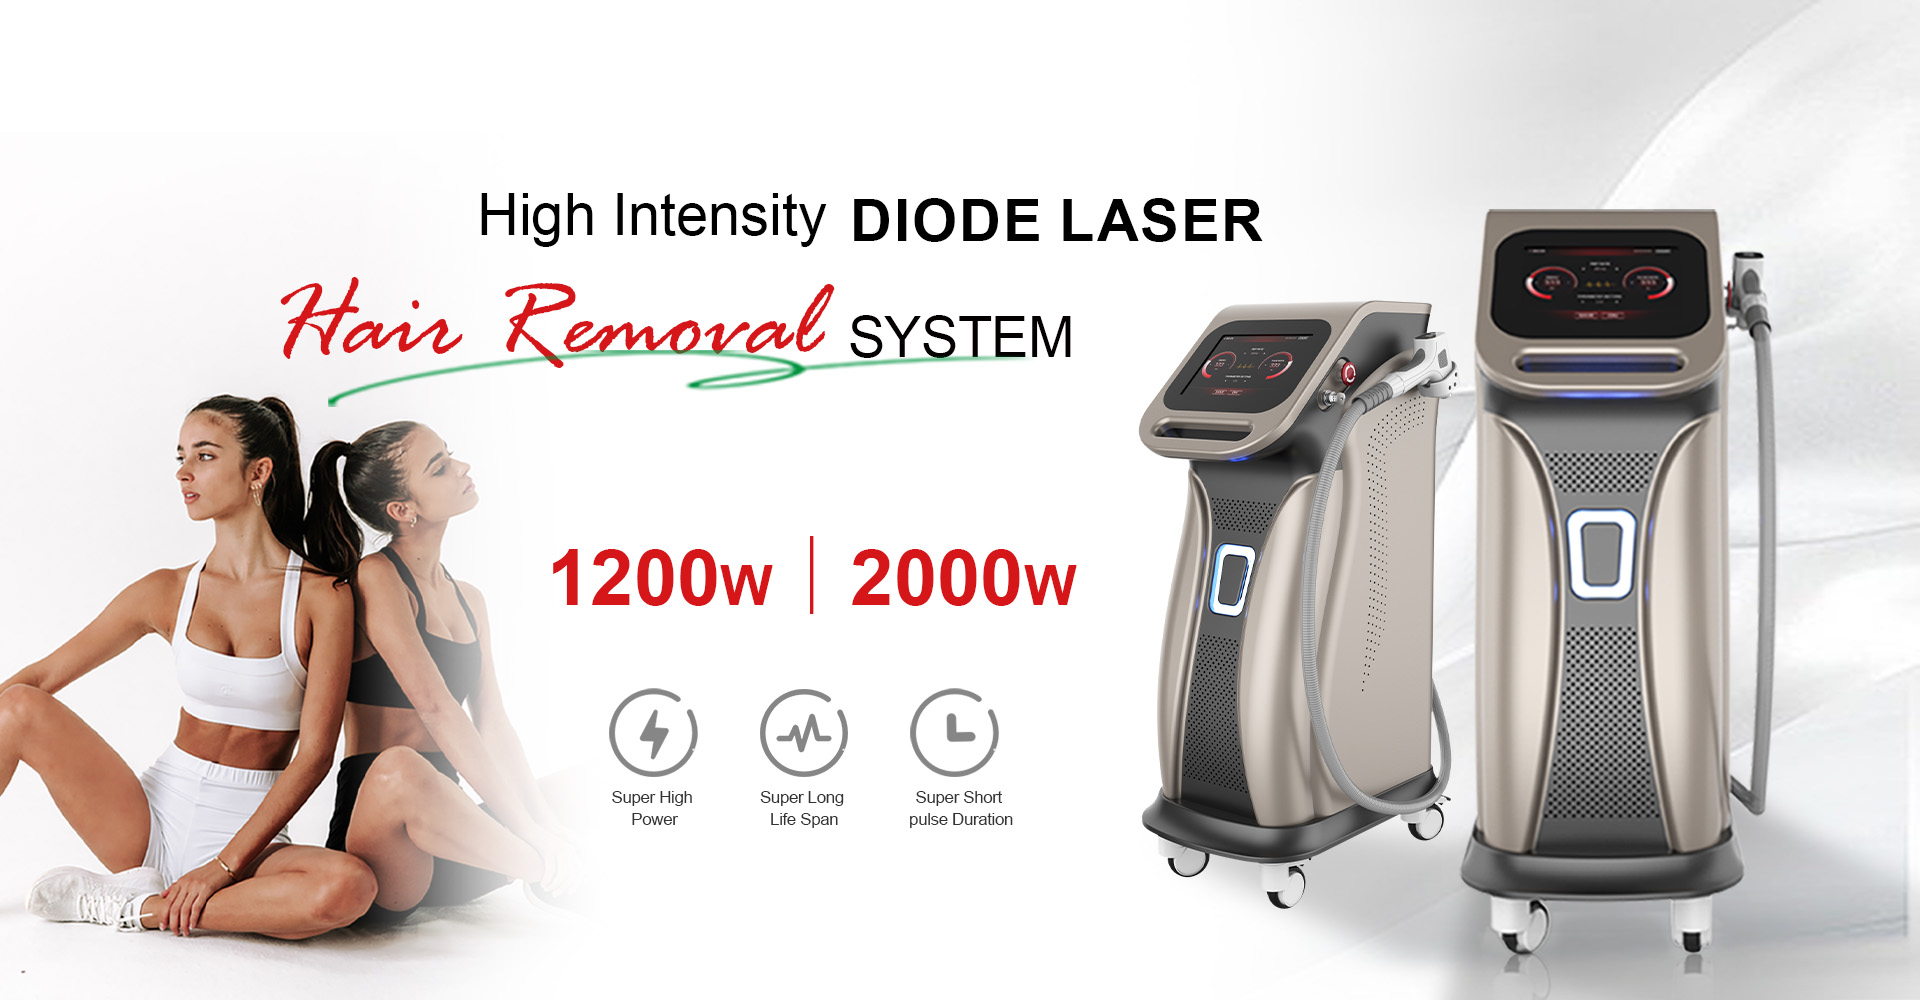 Is diode laser good for hair removal?